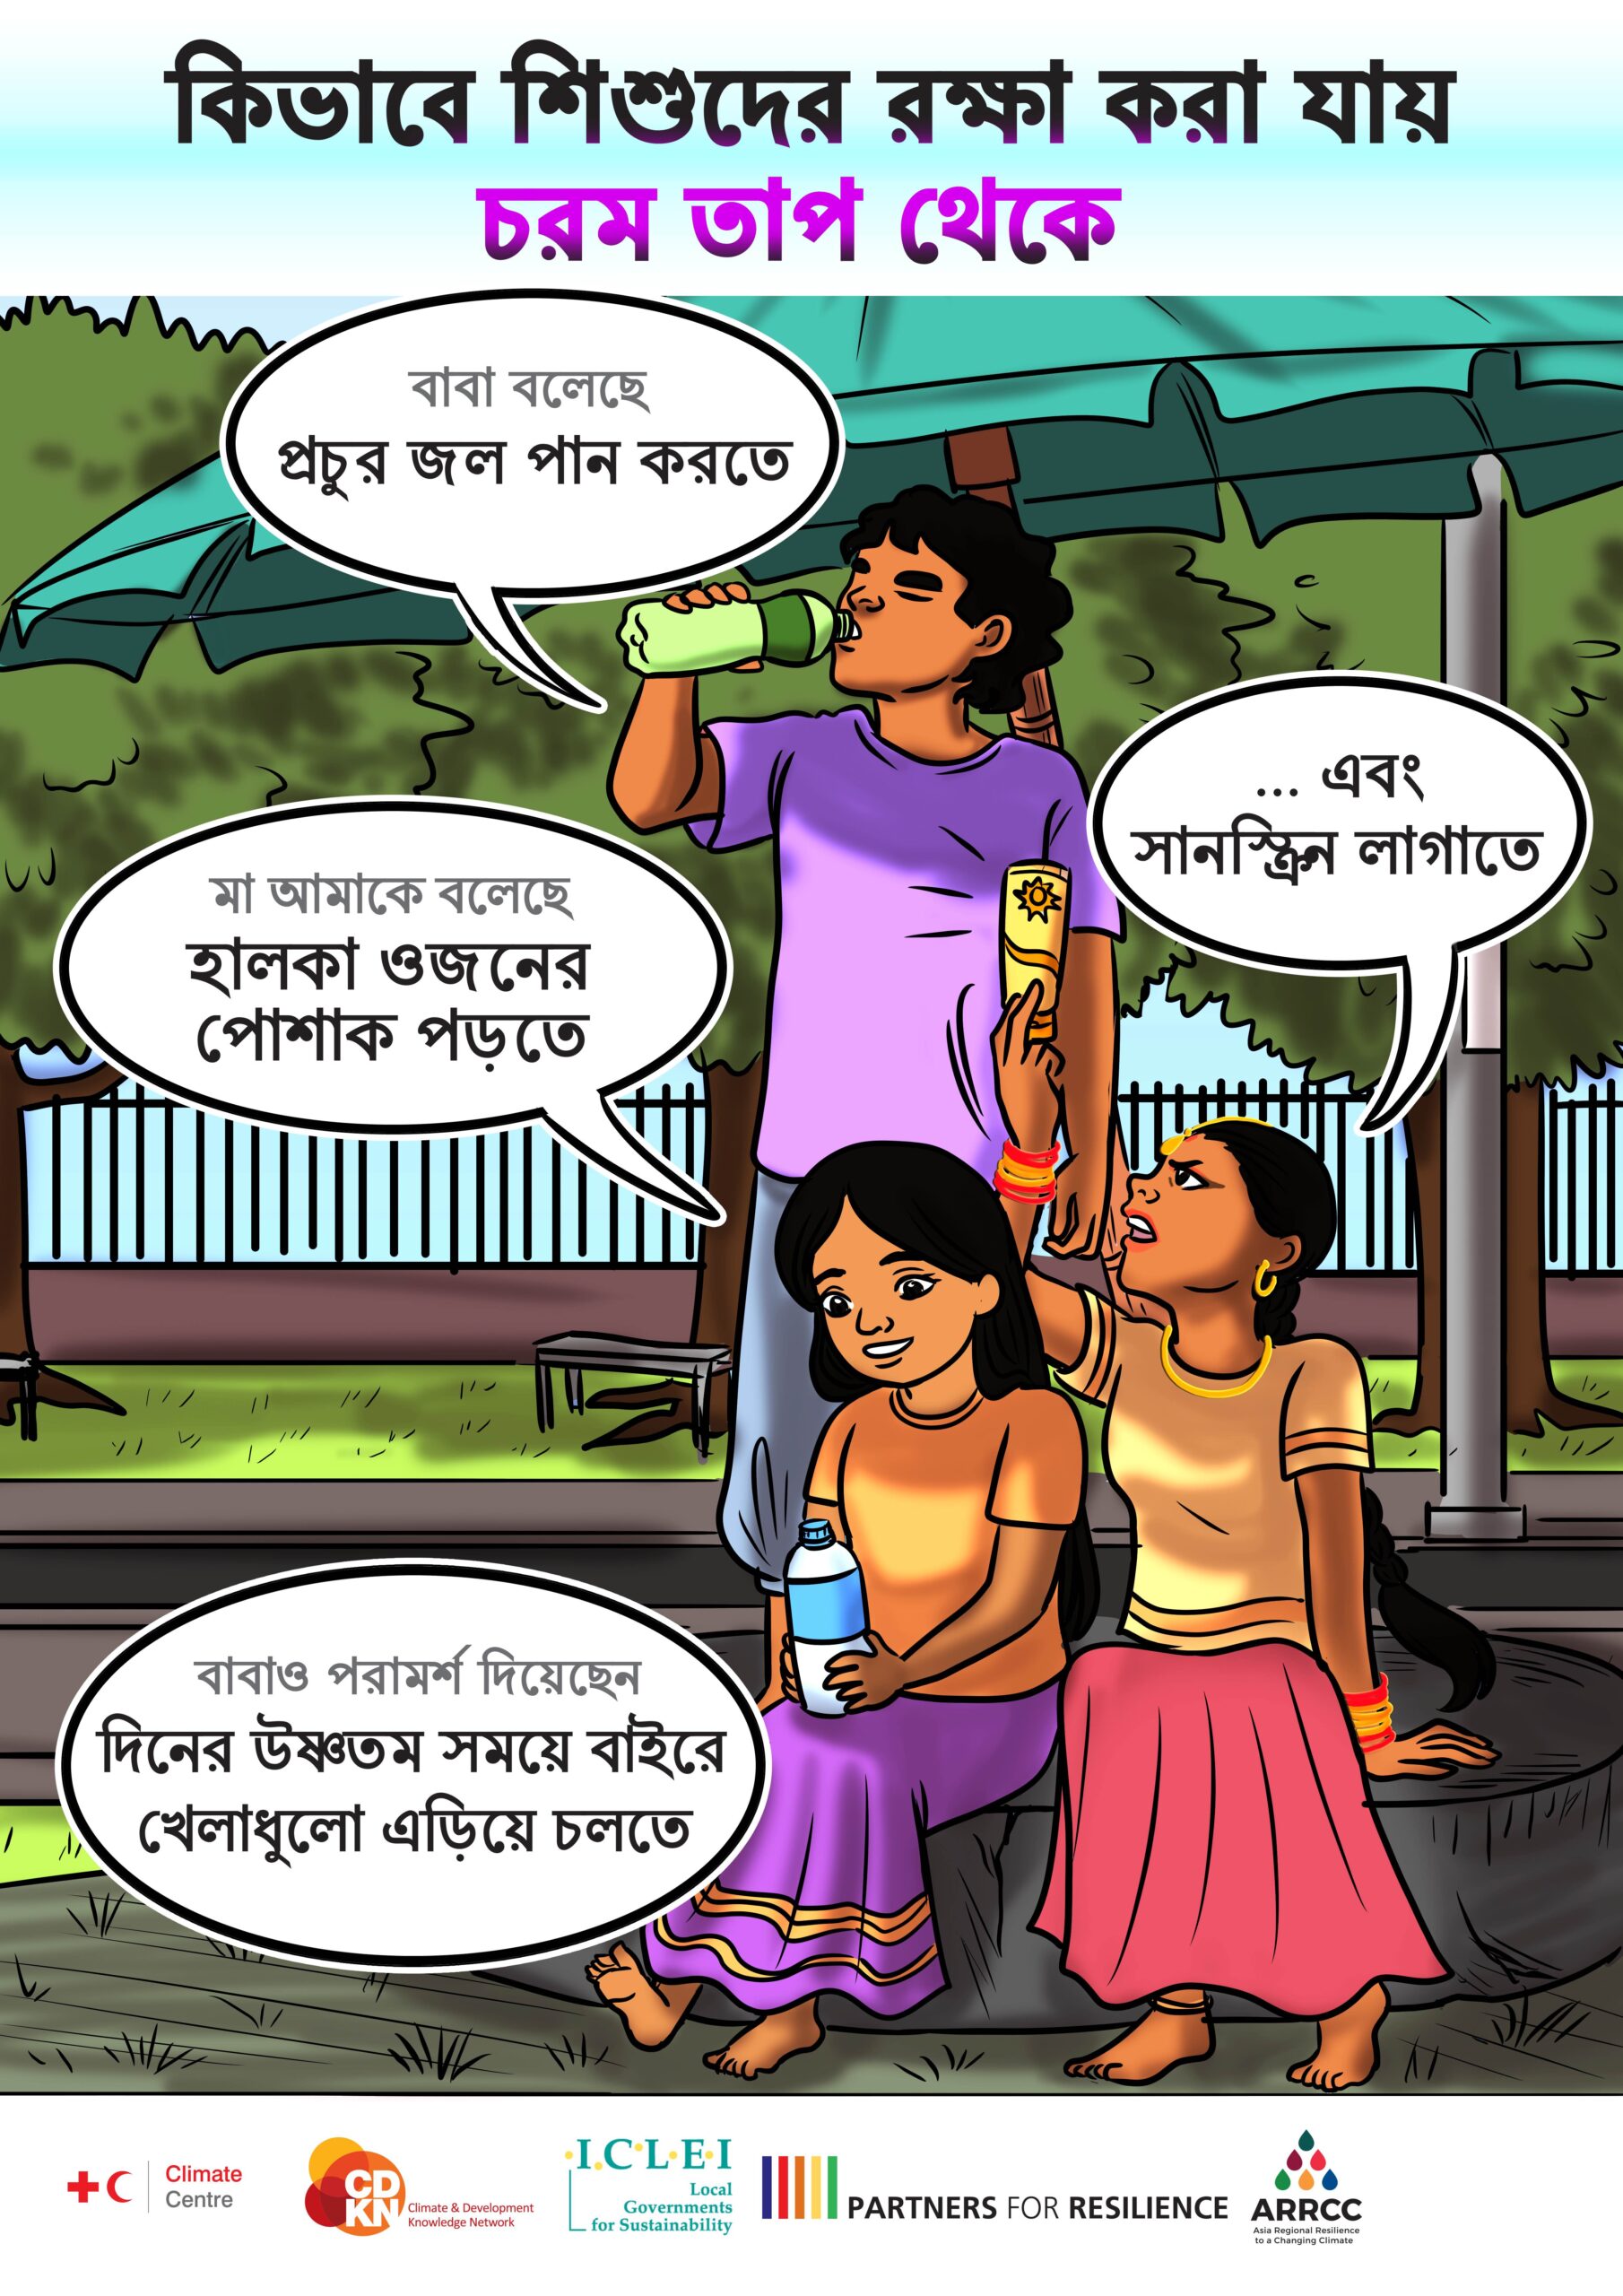 Heat action campaign in Bengali